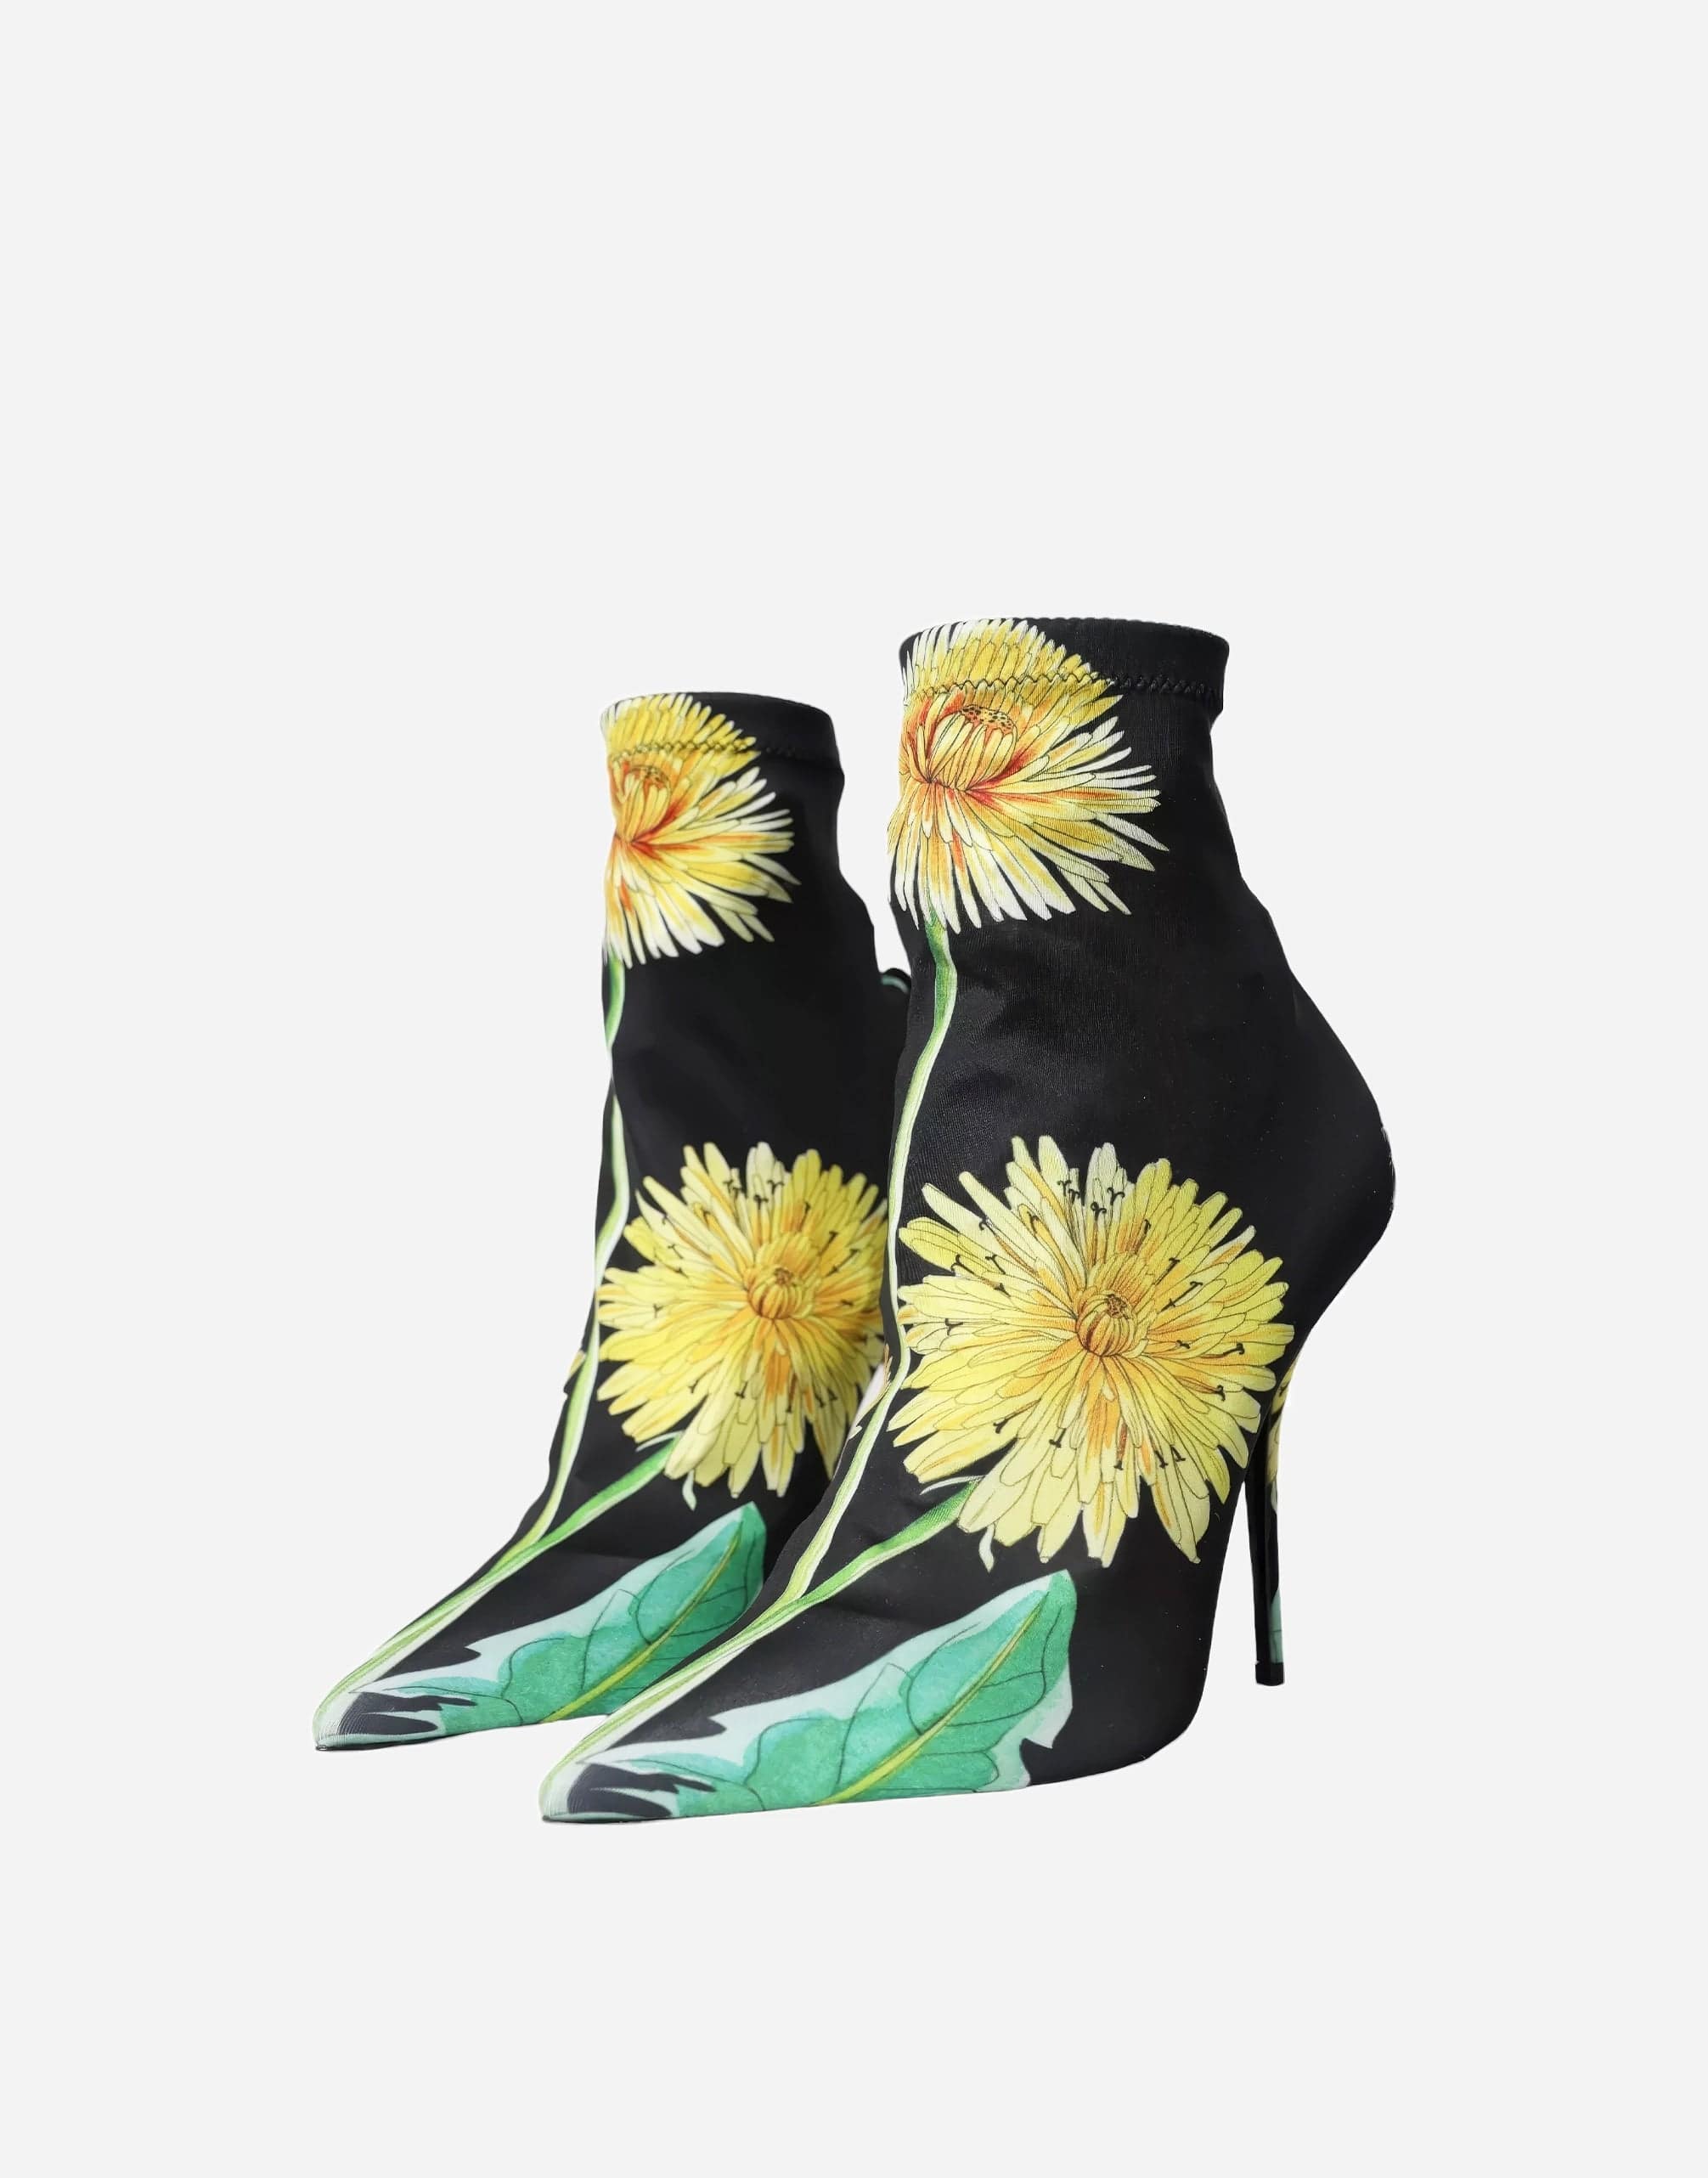 Dolce & Gabbana Black Floral Jersey Stretch Ankle Boots Shoes